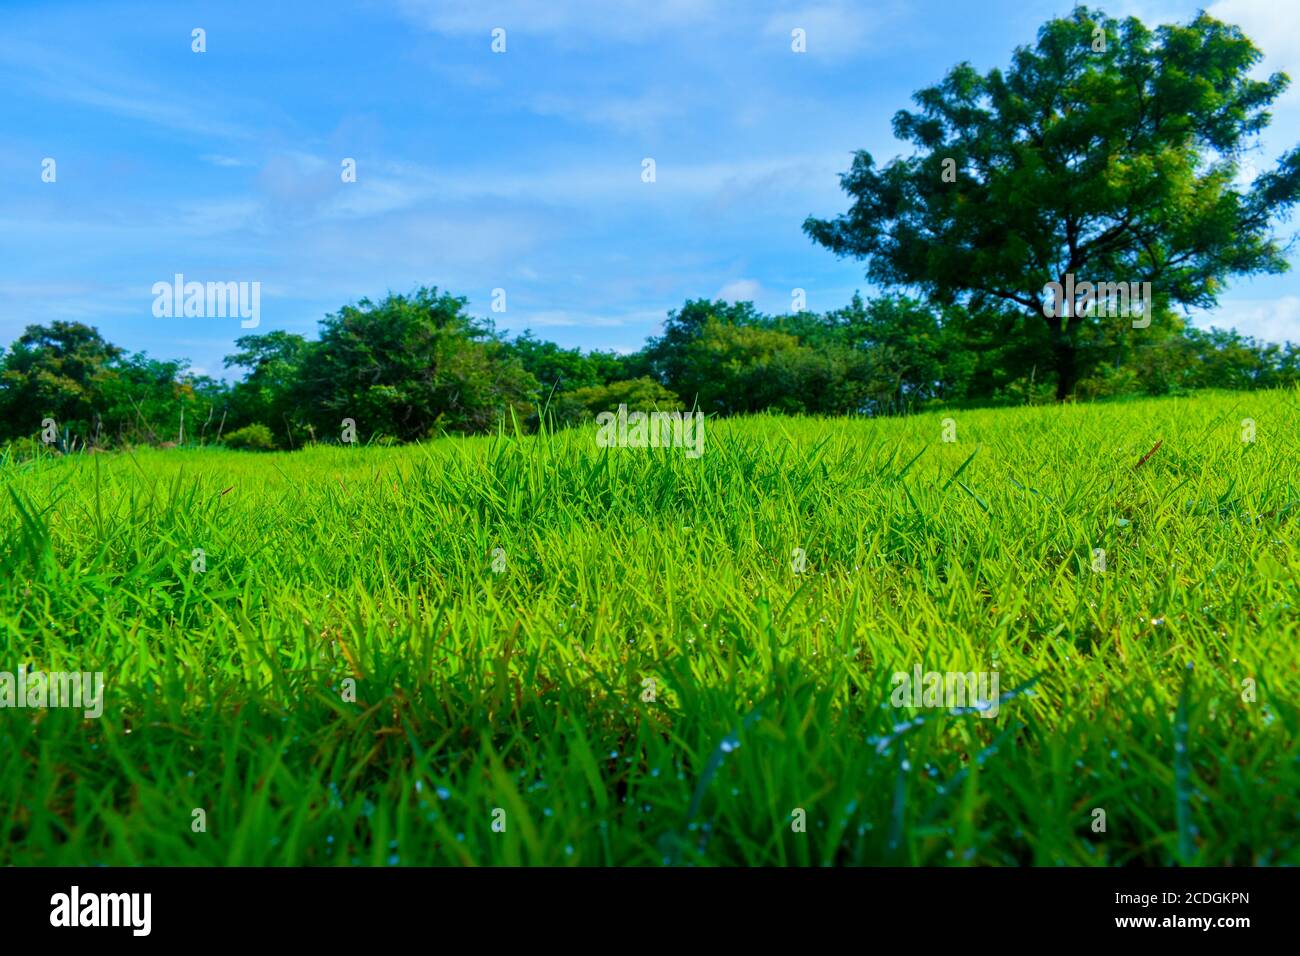 Grasslands are generally open and continuous, fairly flat areas of grass.They are often located between temperate forests at high latitudes and desert. Stock Photo